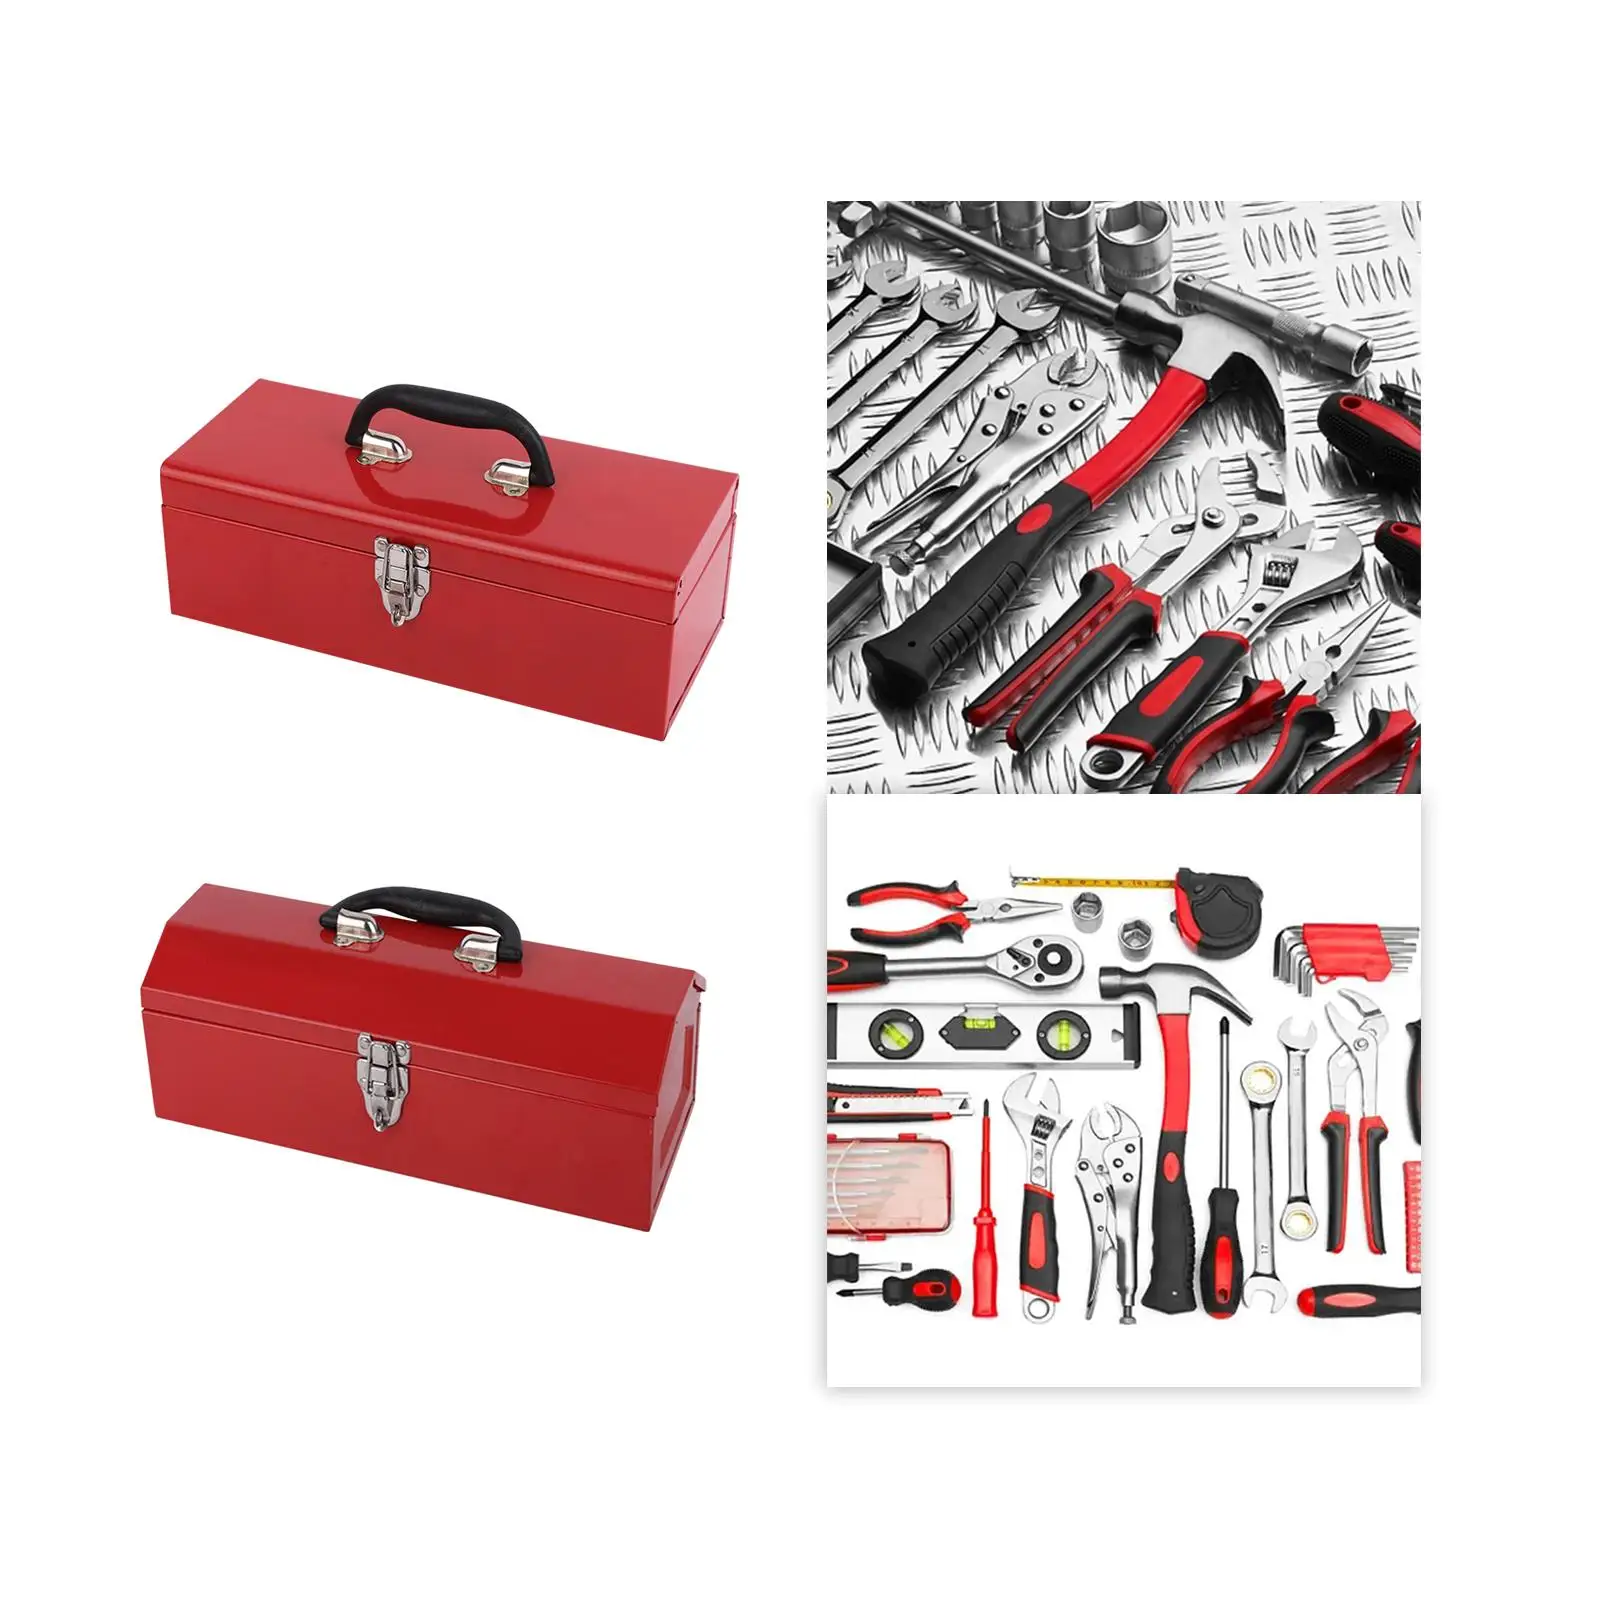 Metal Tool Box Durable Easily Carry Multipurpose Heavy Duty Tool Organizer for Home, Construction Site, Garage, Car, Workshop